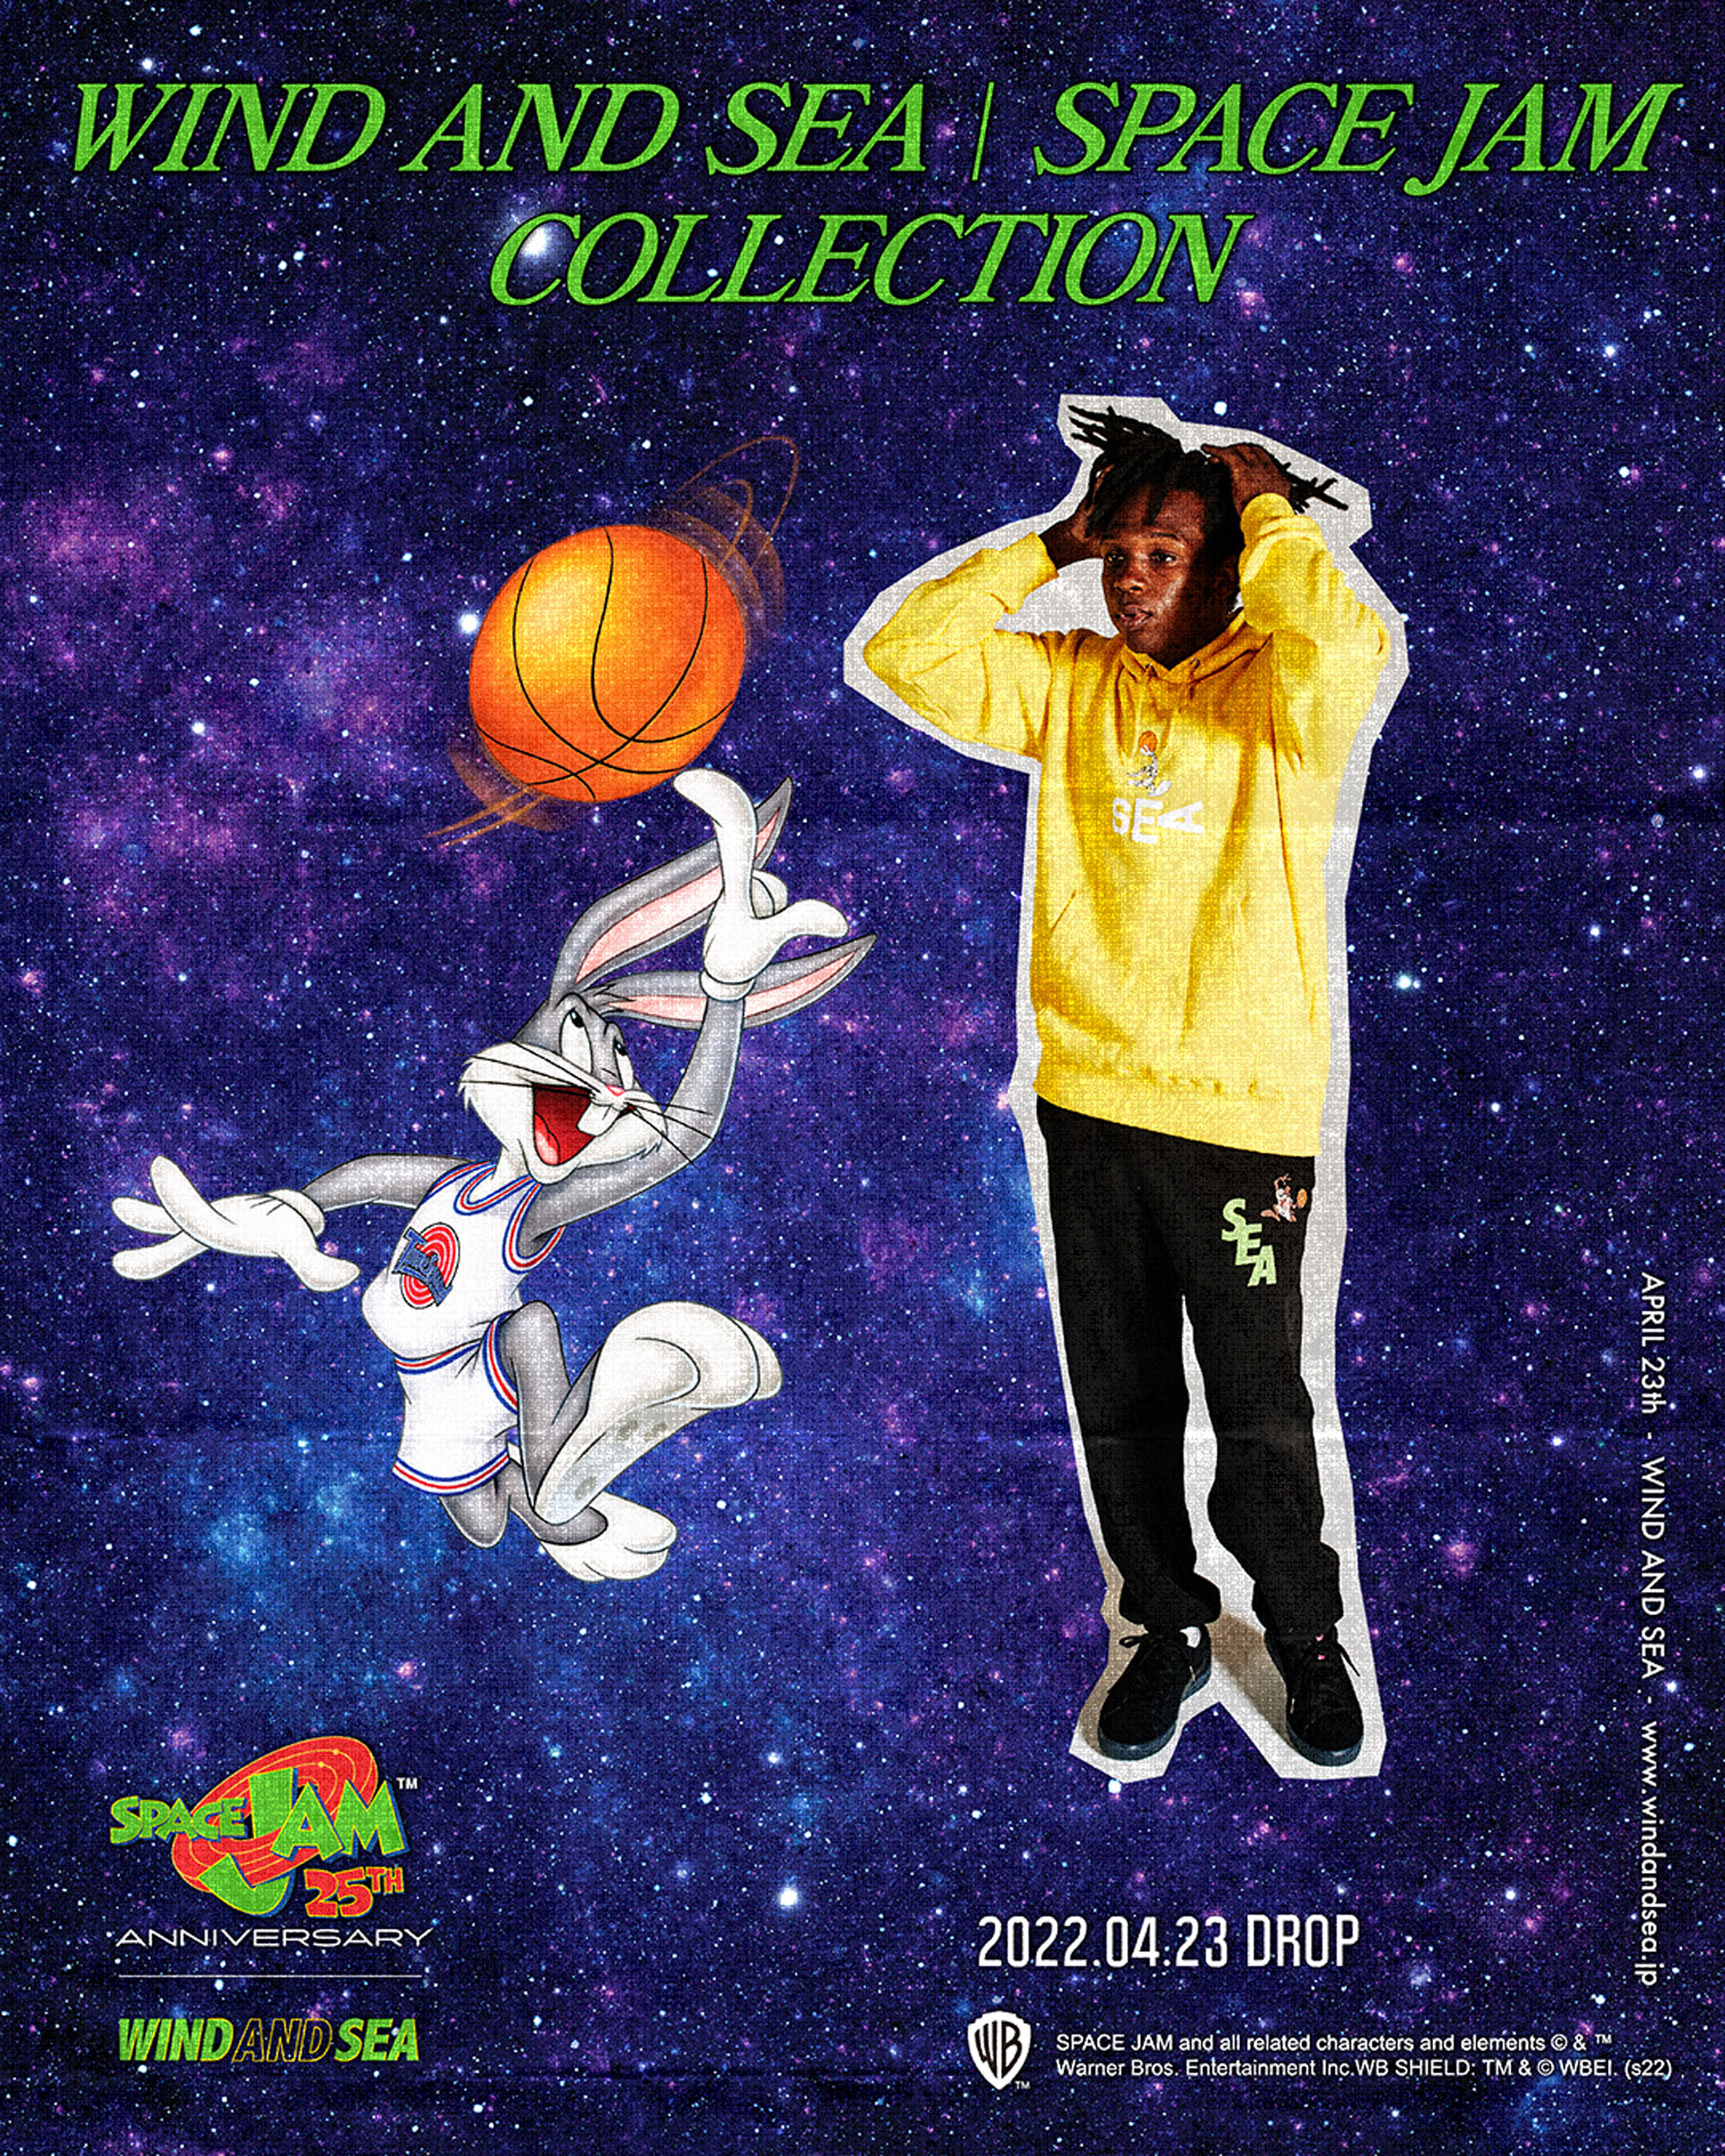 WIND AND SEAから『SPACE JAM』とのコラボアイテムが4⽉30⽇(⼟)登場 